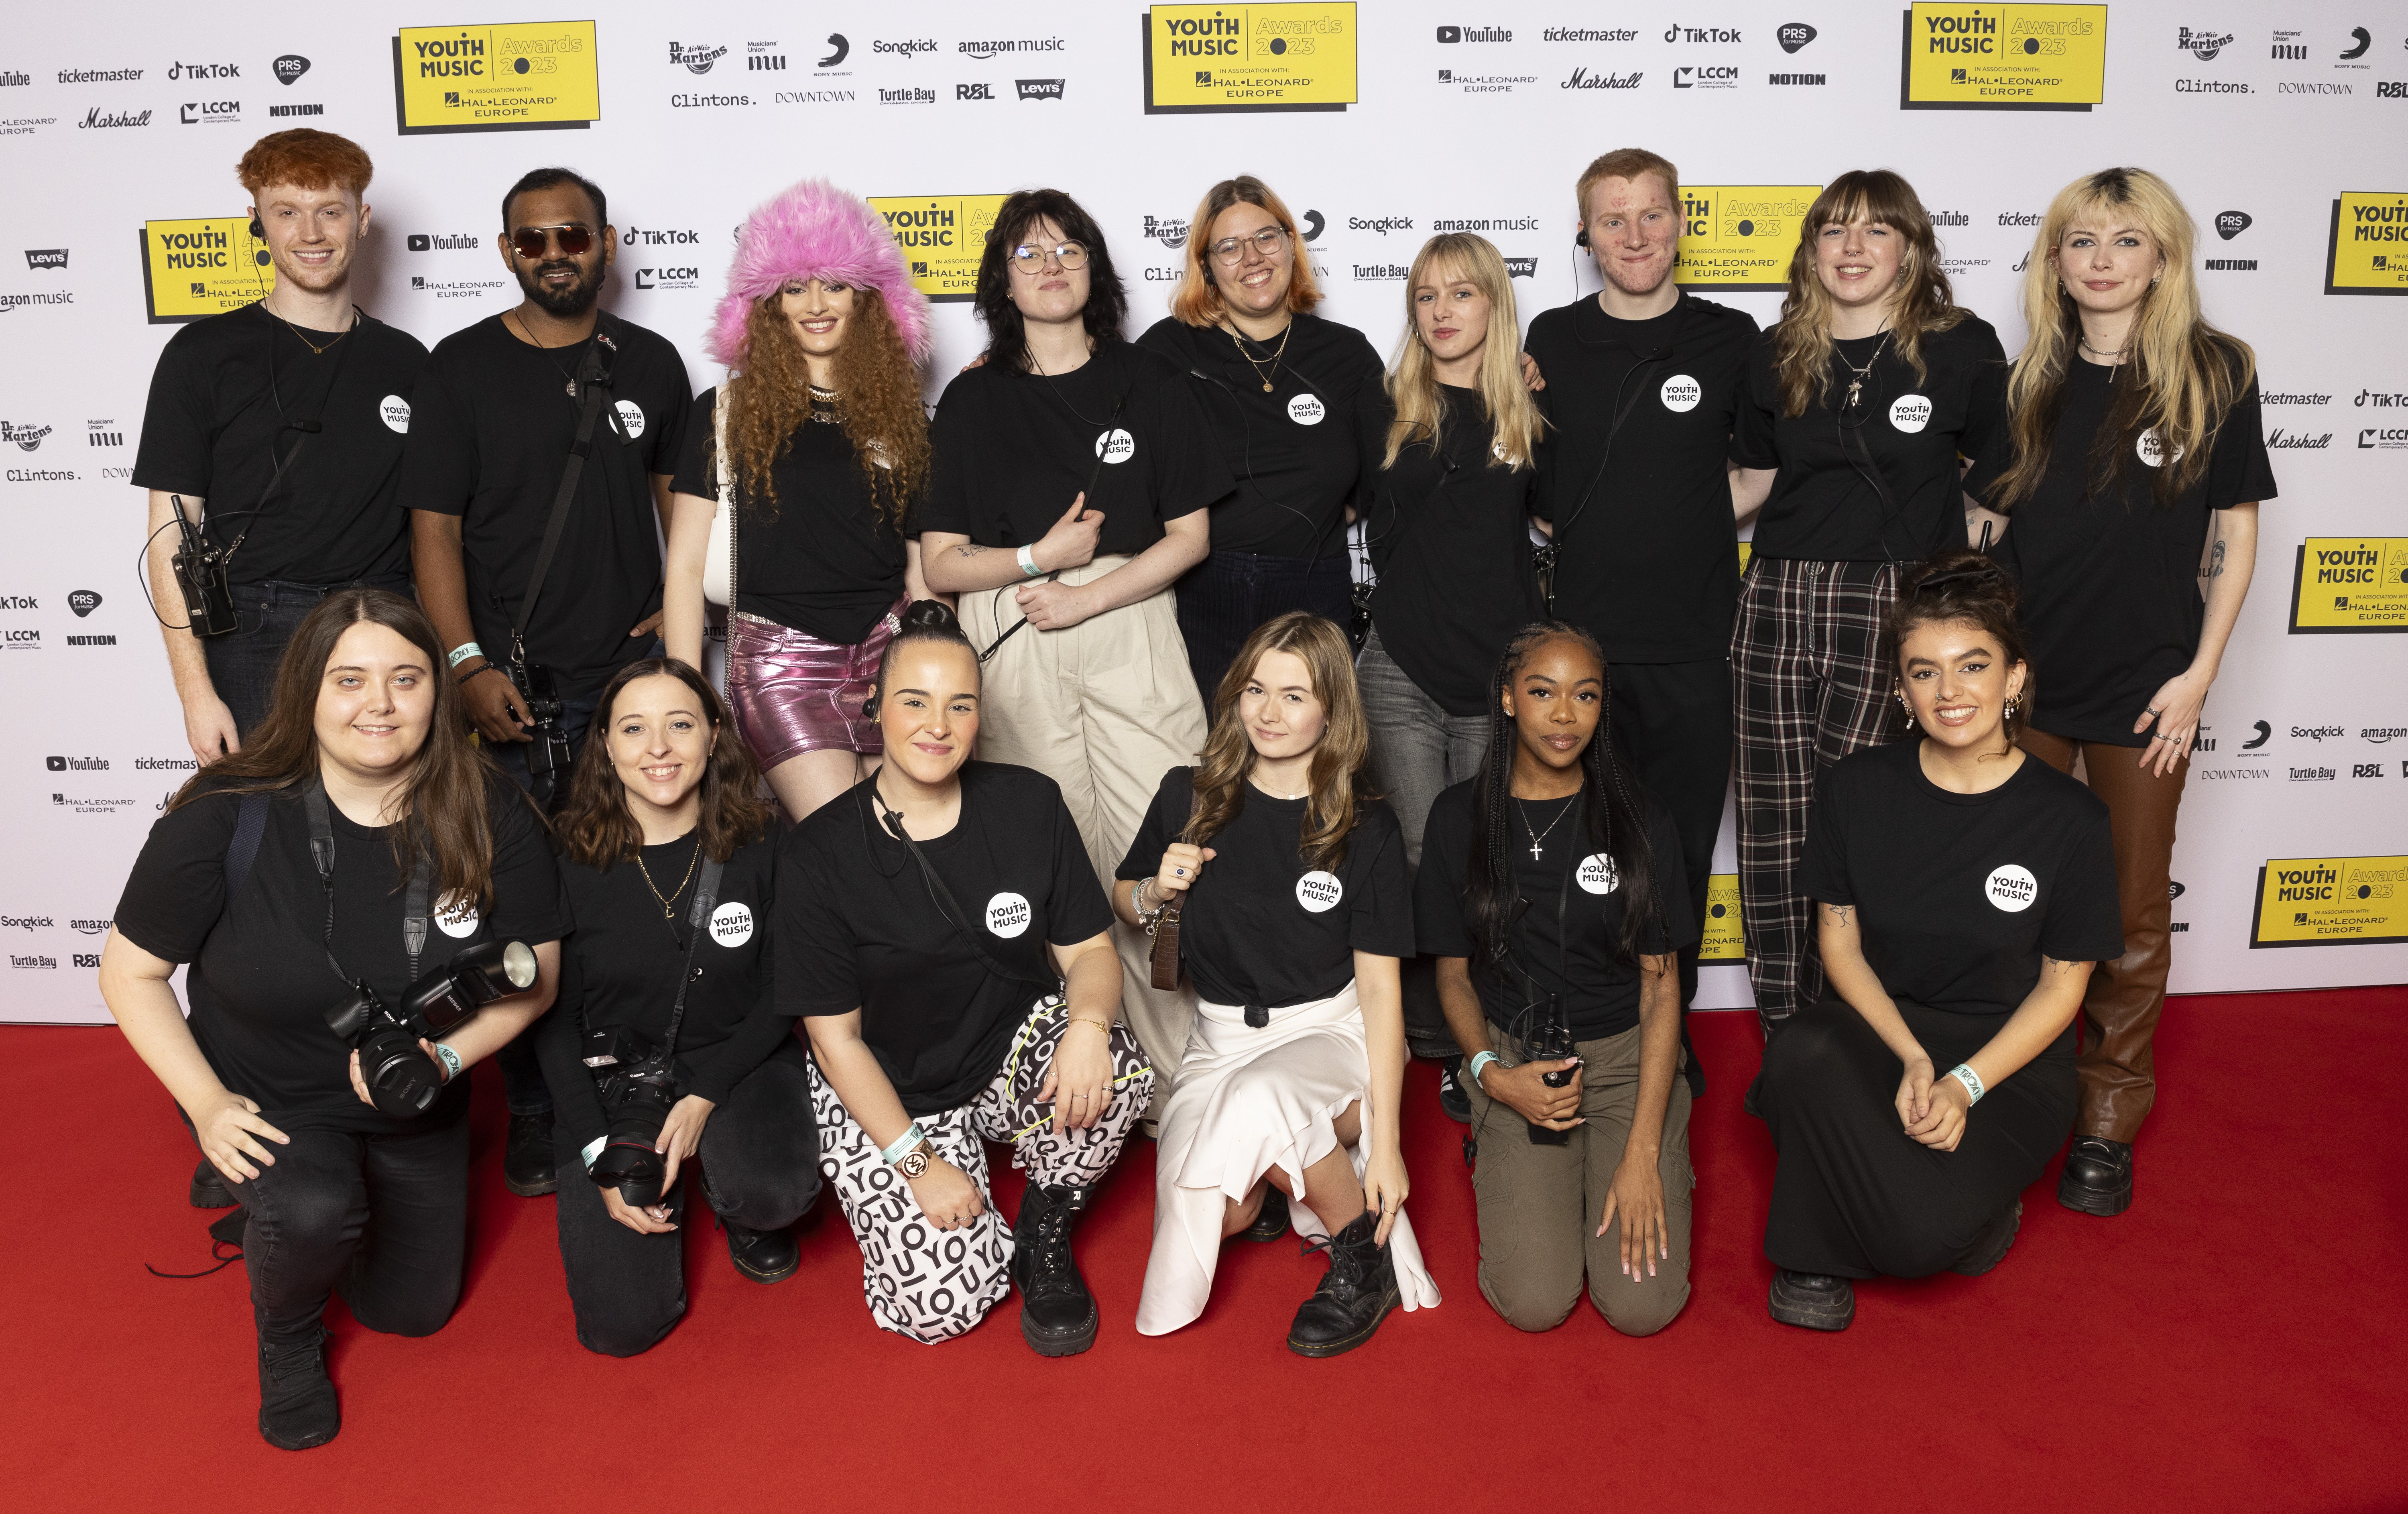 a group of young people wearing black youth music logo t-shirts pose together on a red carpet